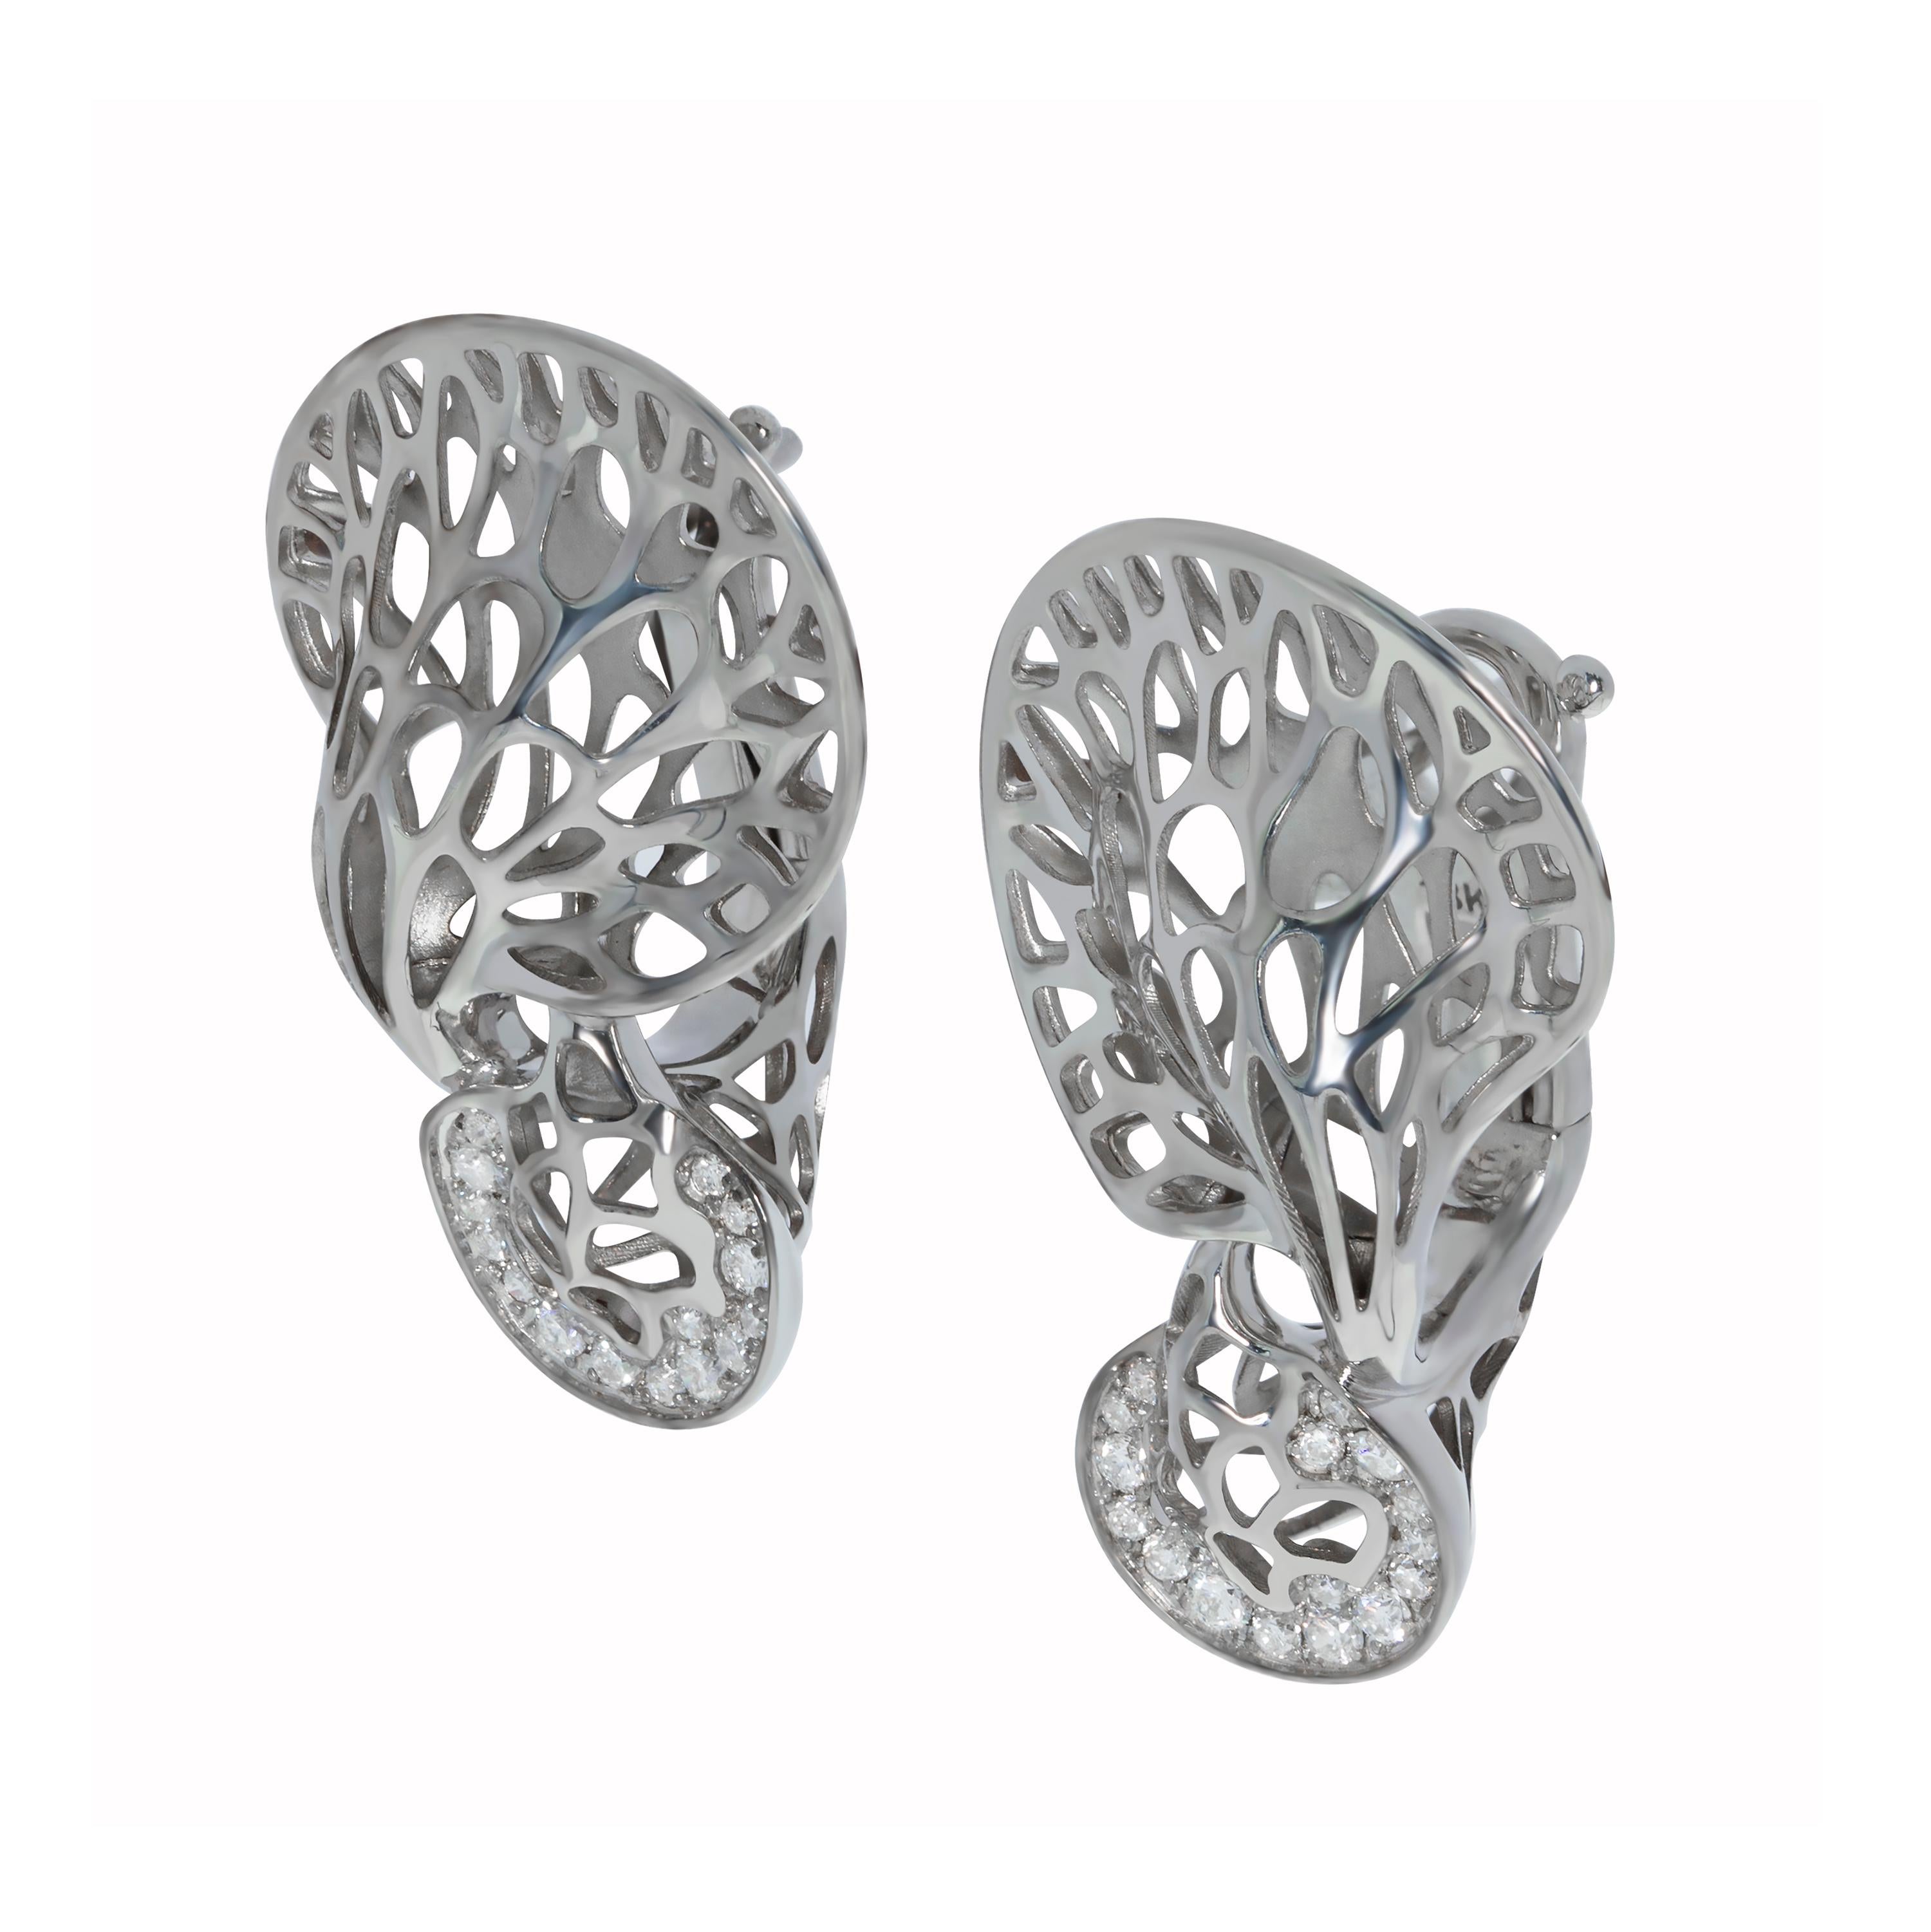 Diamonds 18 Karat White Gold Tree Mushroom Earrings
We present to your attention Earrings from our Tresure Forest Collection in the form of a tree mushroom. White 18 Karat Gold Earrings have an abnormal deeply cracked shape which was created,